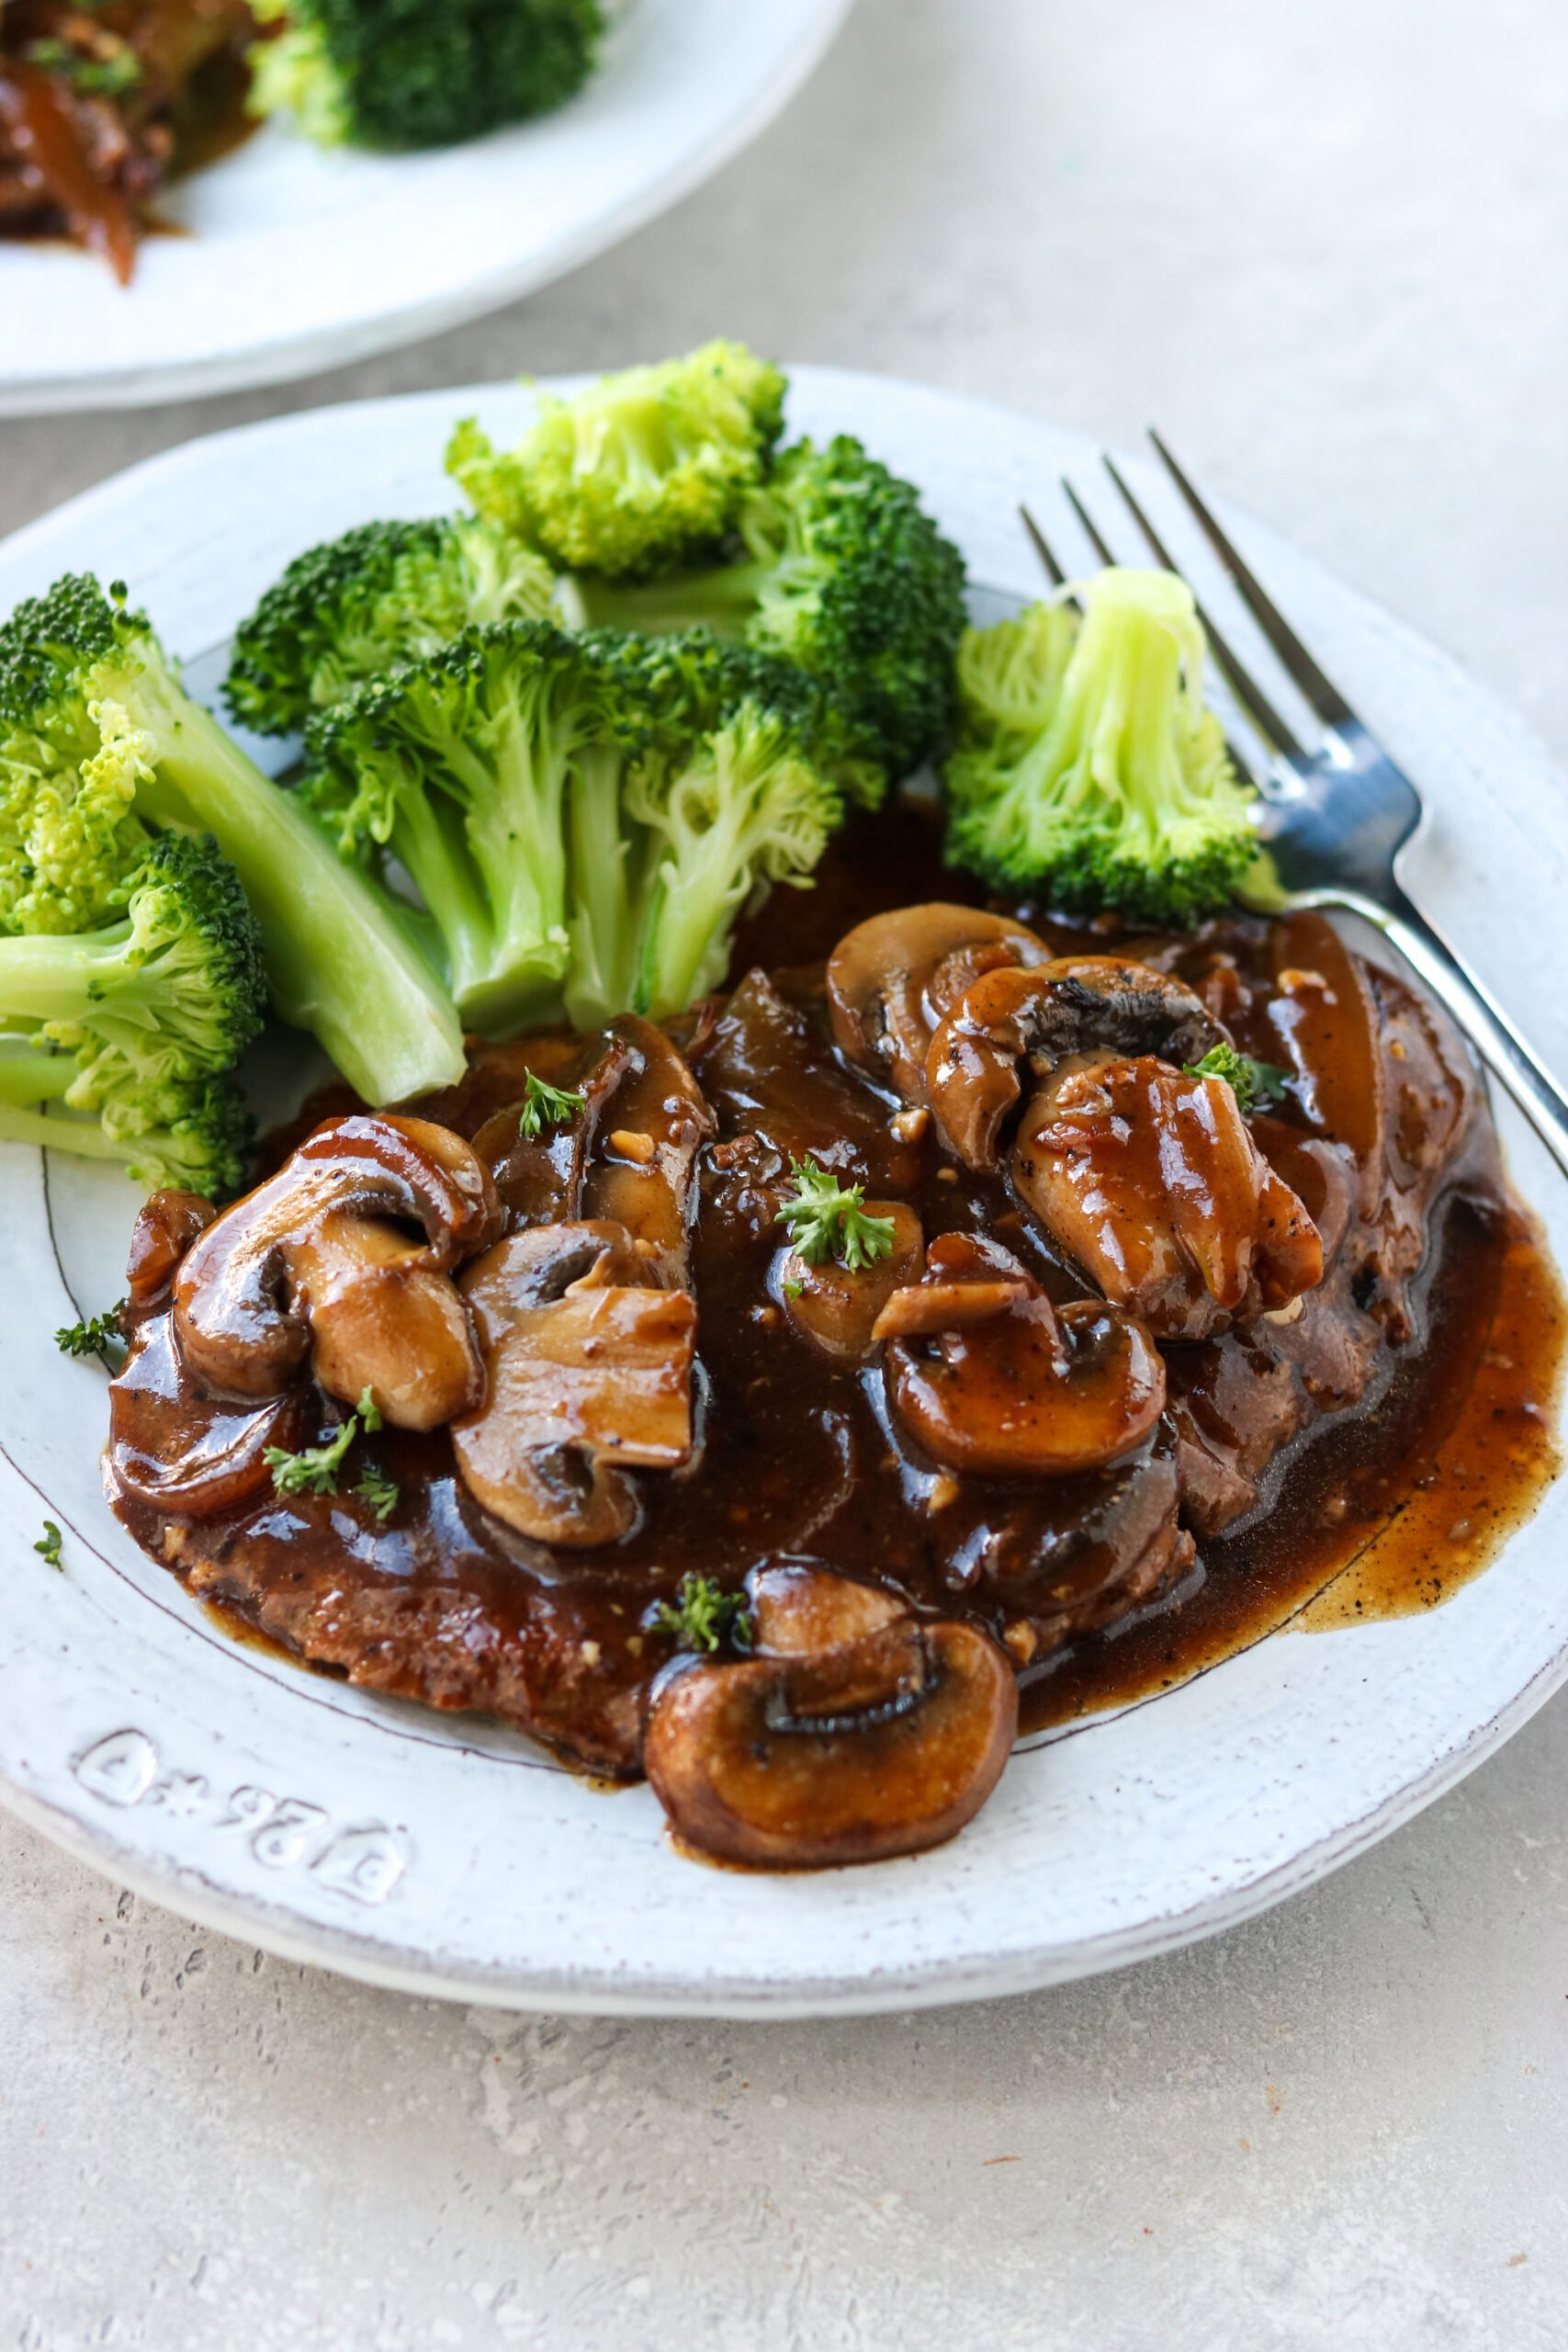 cube steak with gravy on a plate topped with mushrooms and next to a side of broccoli